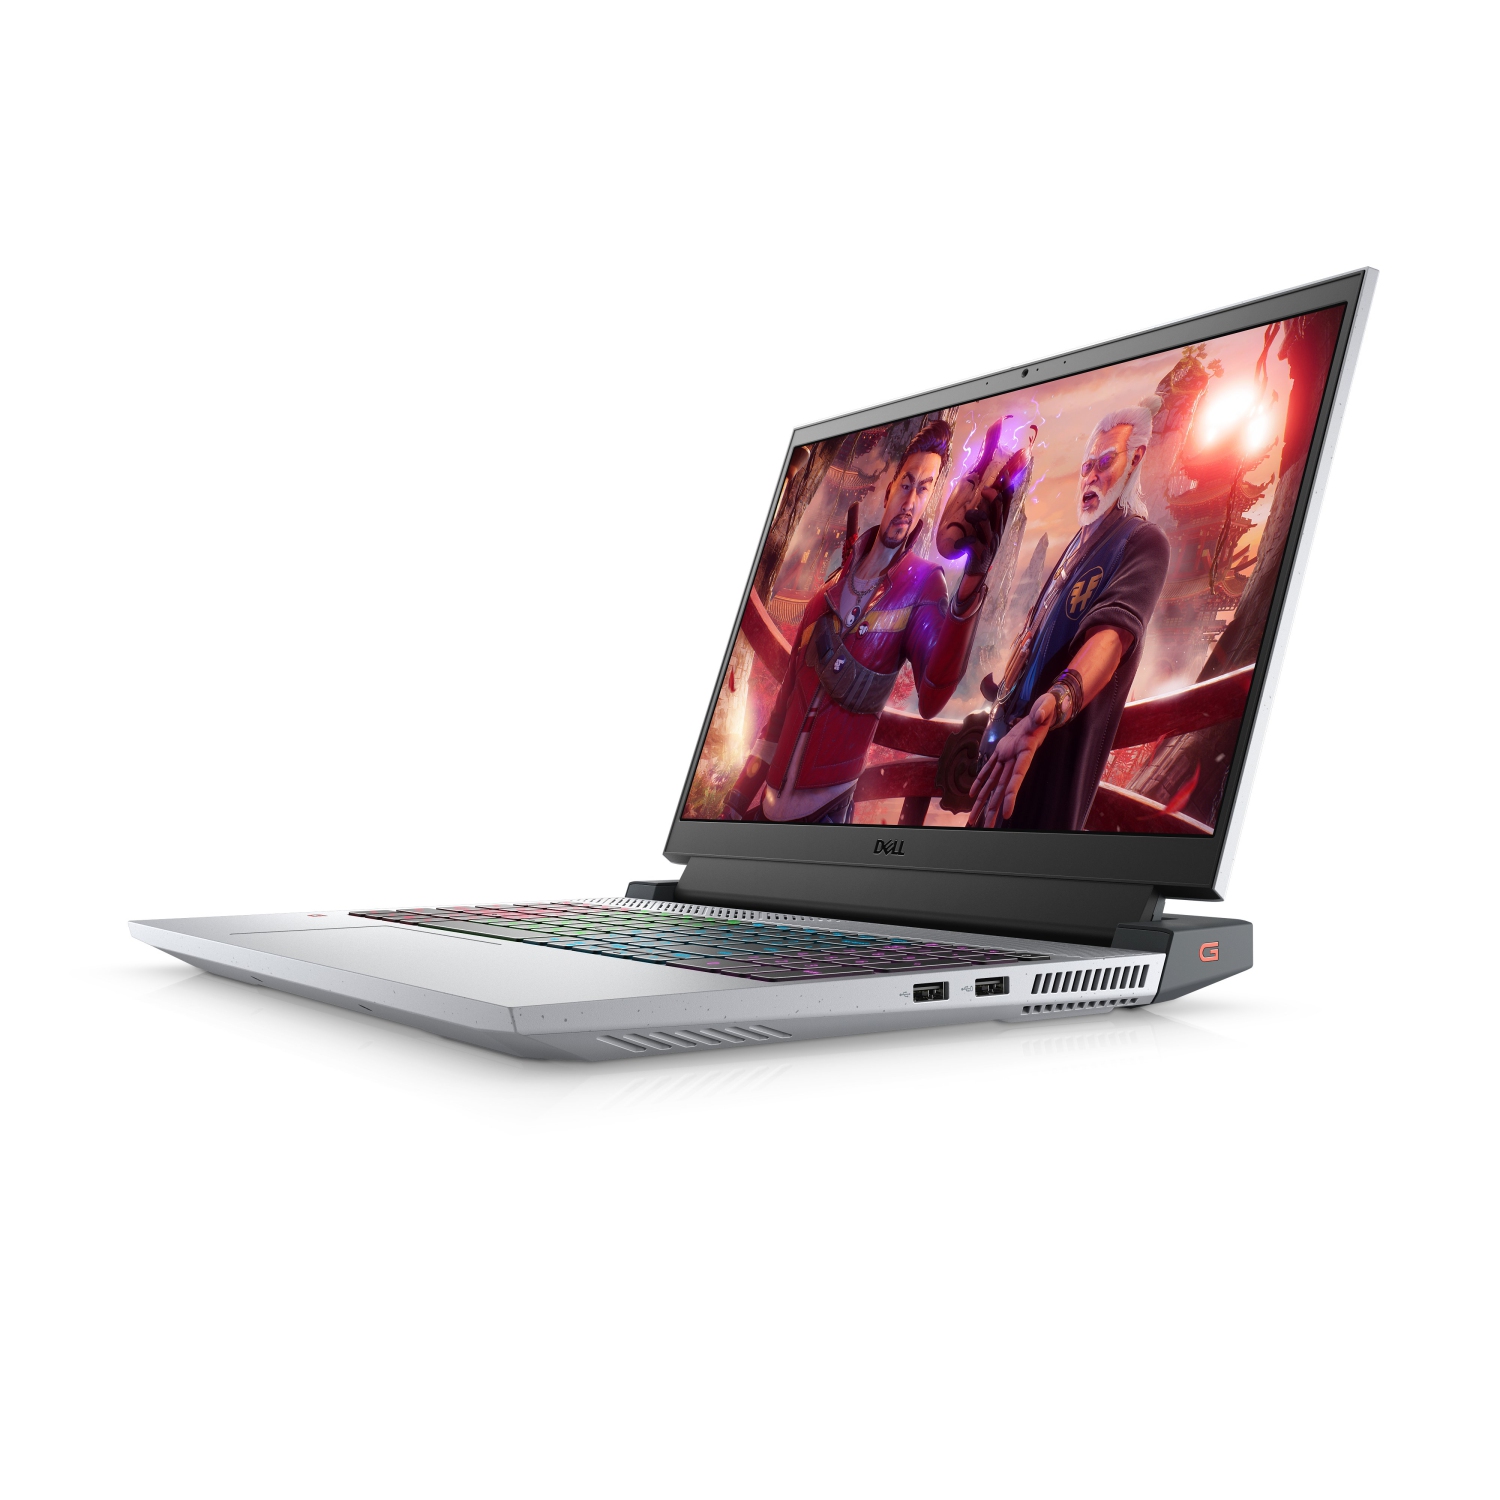 Refurbished (Excellent) - Dell G15 5515 Gaming Laptop (2021) | 15.6" FHD | Core Ryzen 7 - 1TB SSD - 16GB RAM - 3050 Ti | 8 Cores @ 4.4 GHz Certified Refurbished